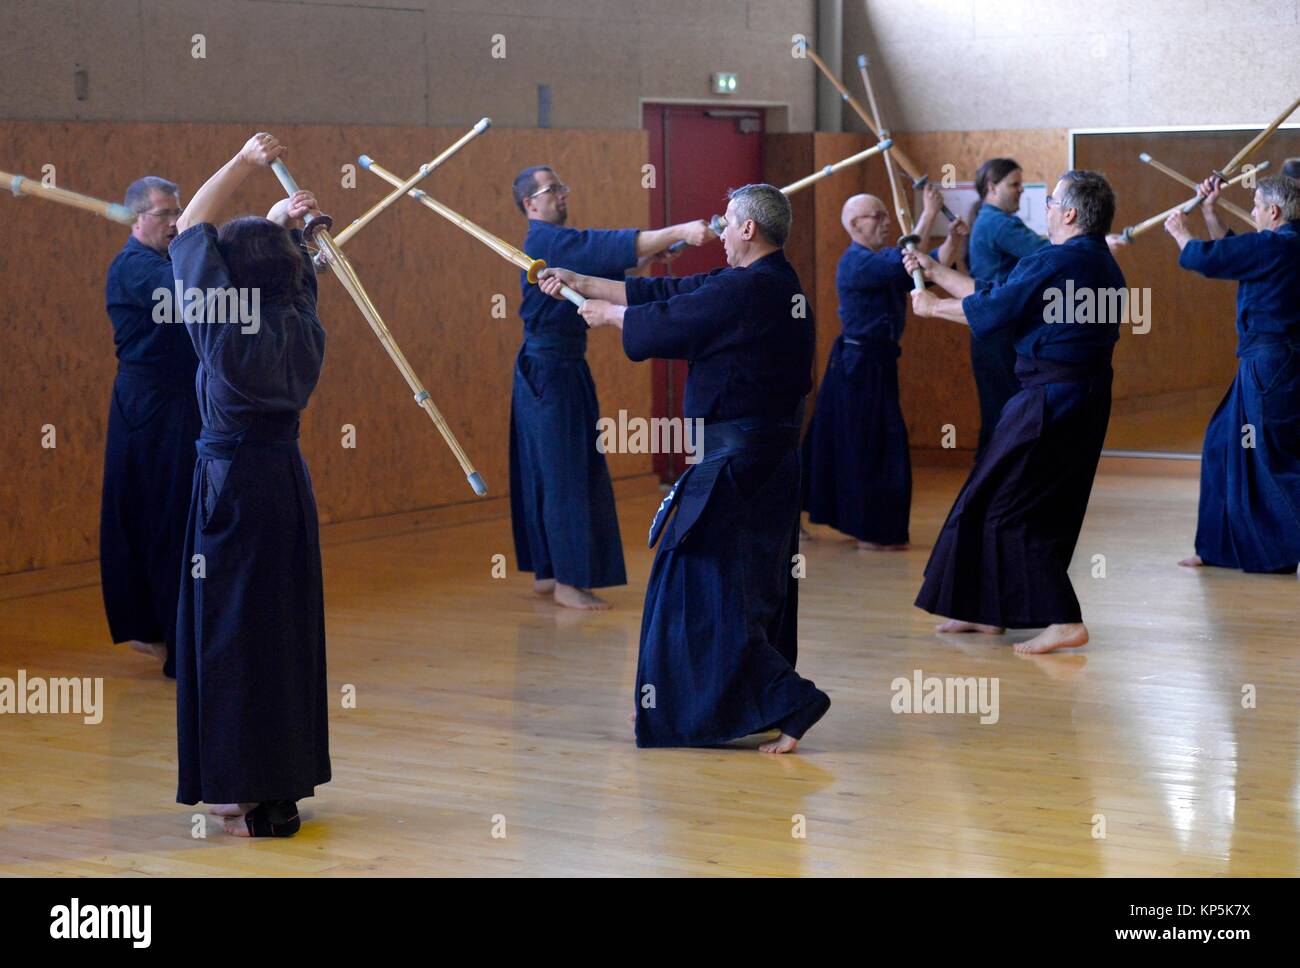 People holding real samurai swords during a swordsmanship exercise called kenjutsu or iaido martial arts demonstration,Sartrouville,Yvelines Stock Photo